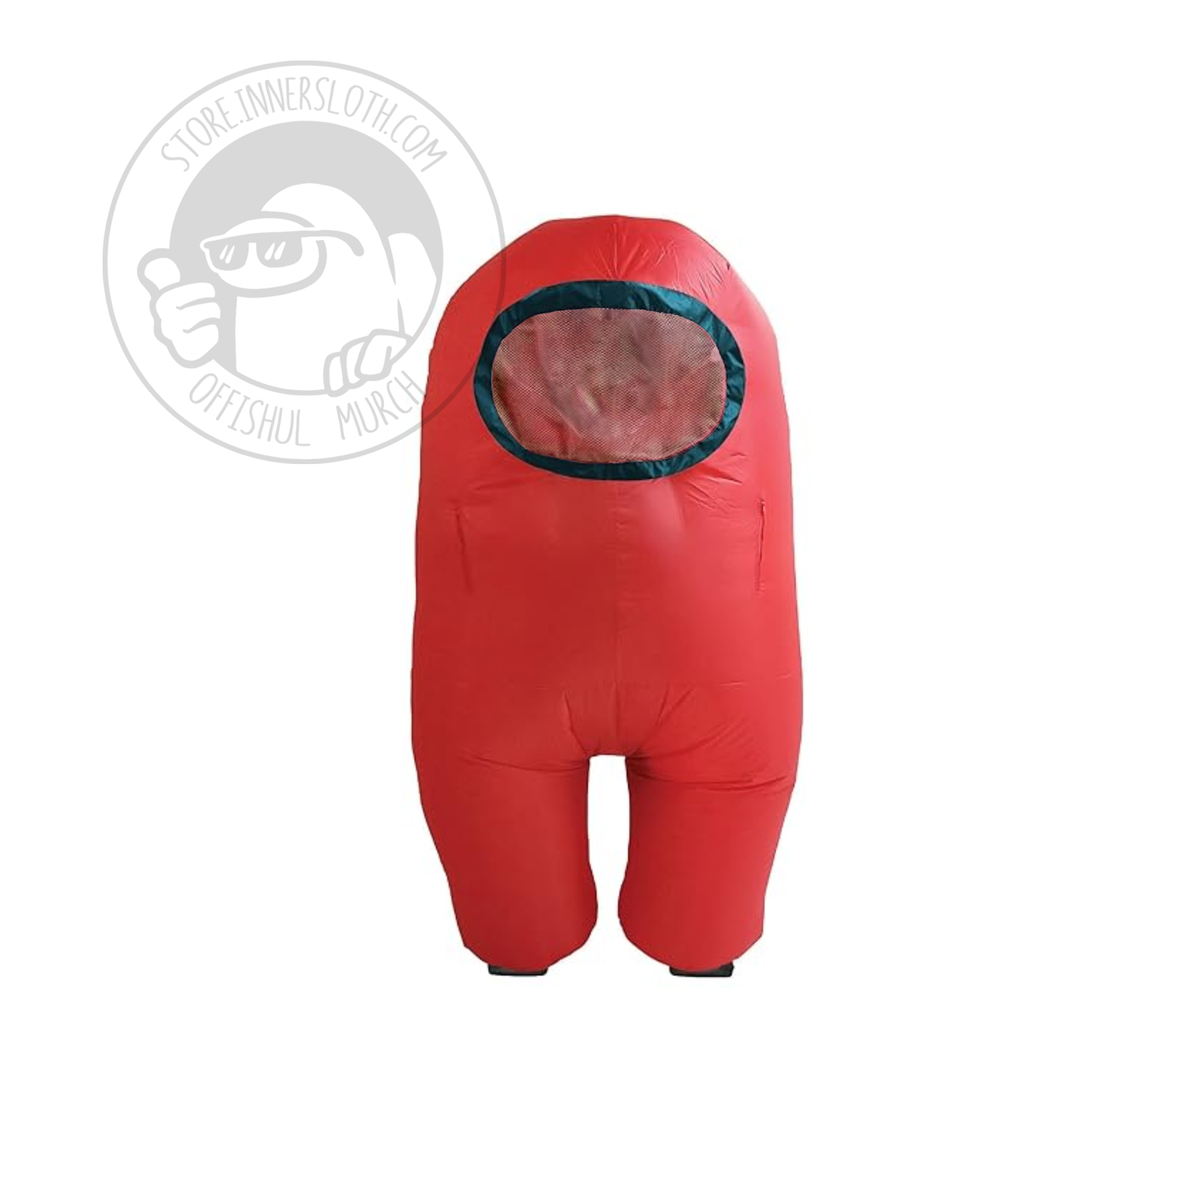 Front view of Red inflatable Crewmate costume.